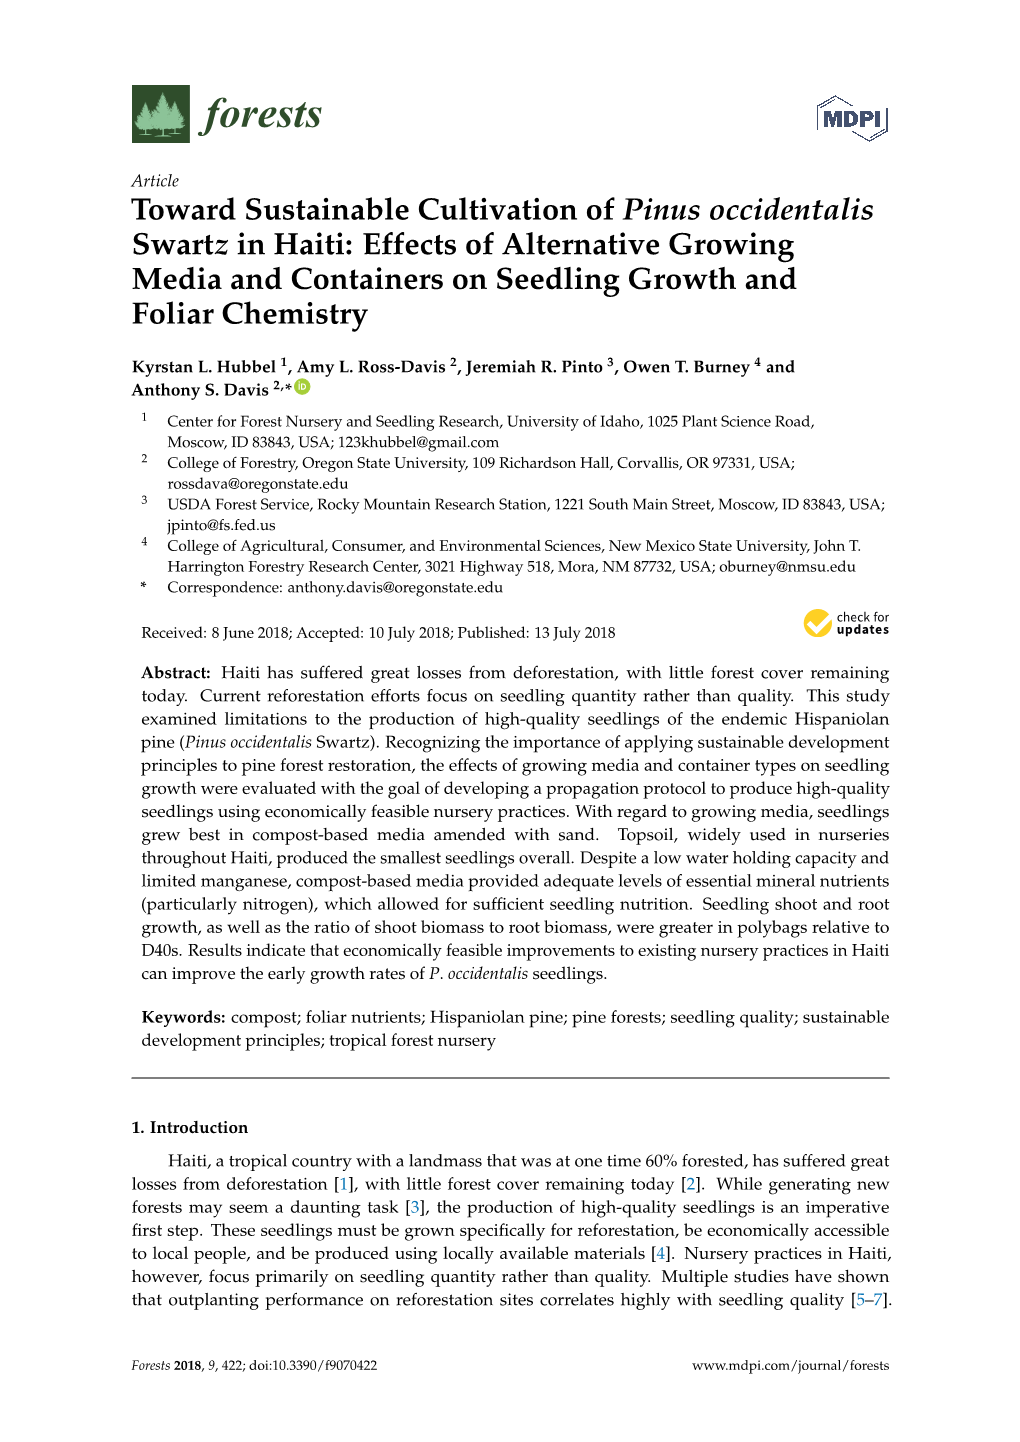 Toward Sustainable Cultivation of Pinus Occidentalis Swartz in Haiti: Effects of Alternative Growing Media and Containers on Seedling Growth and Foliar Chemistry